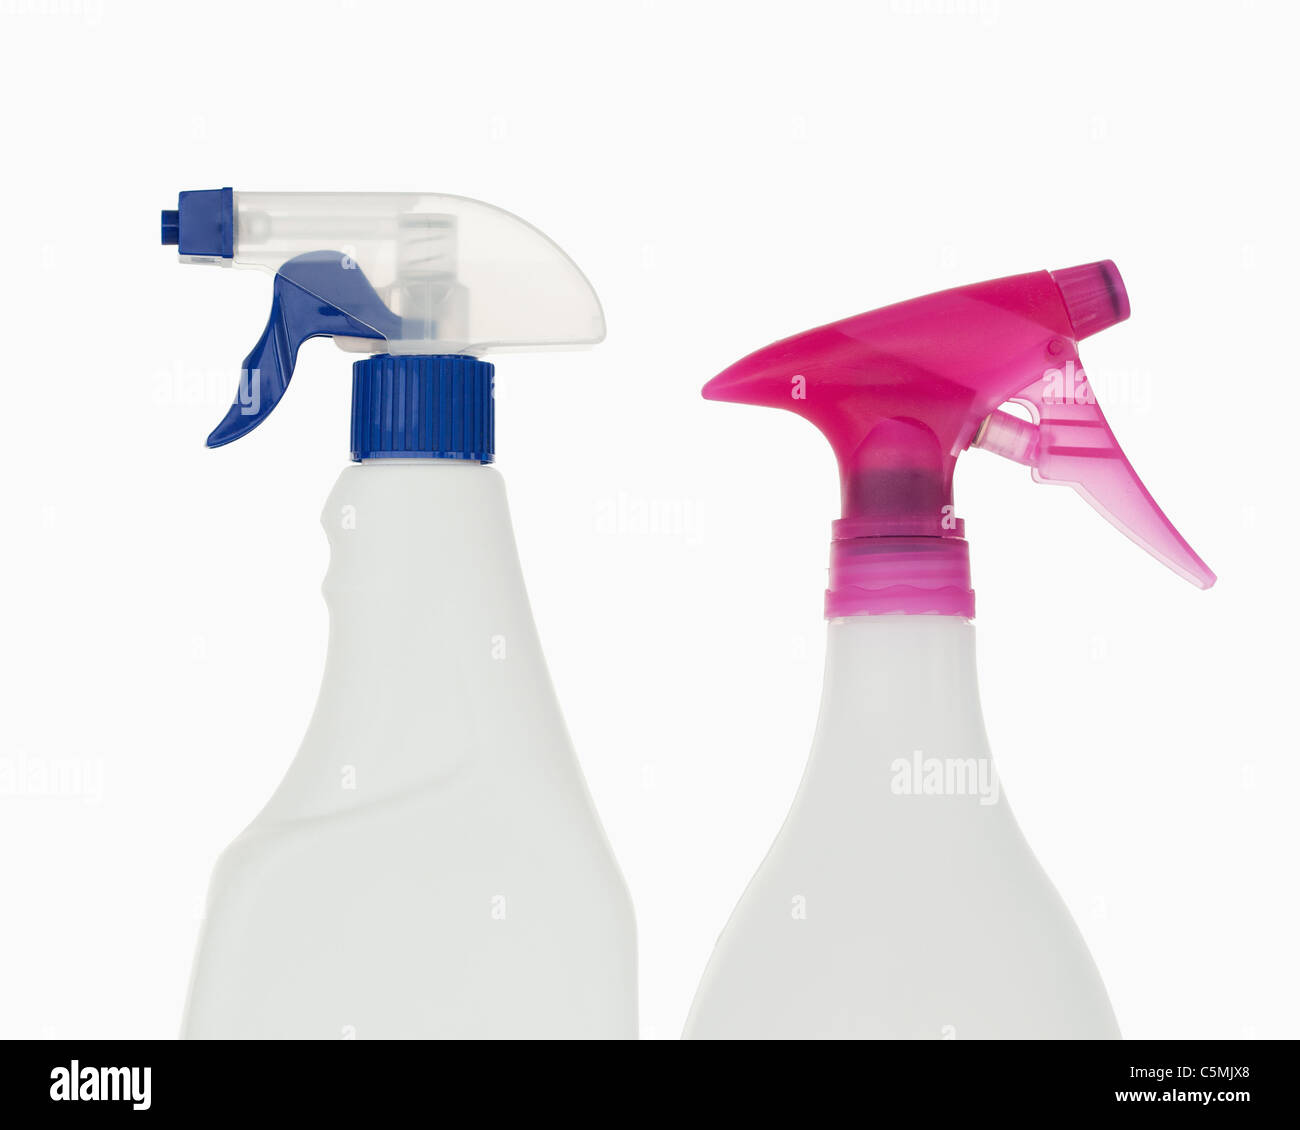 Close up of a pink and a blue spray bottles Banque D'Images